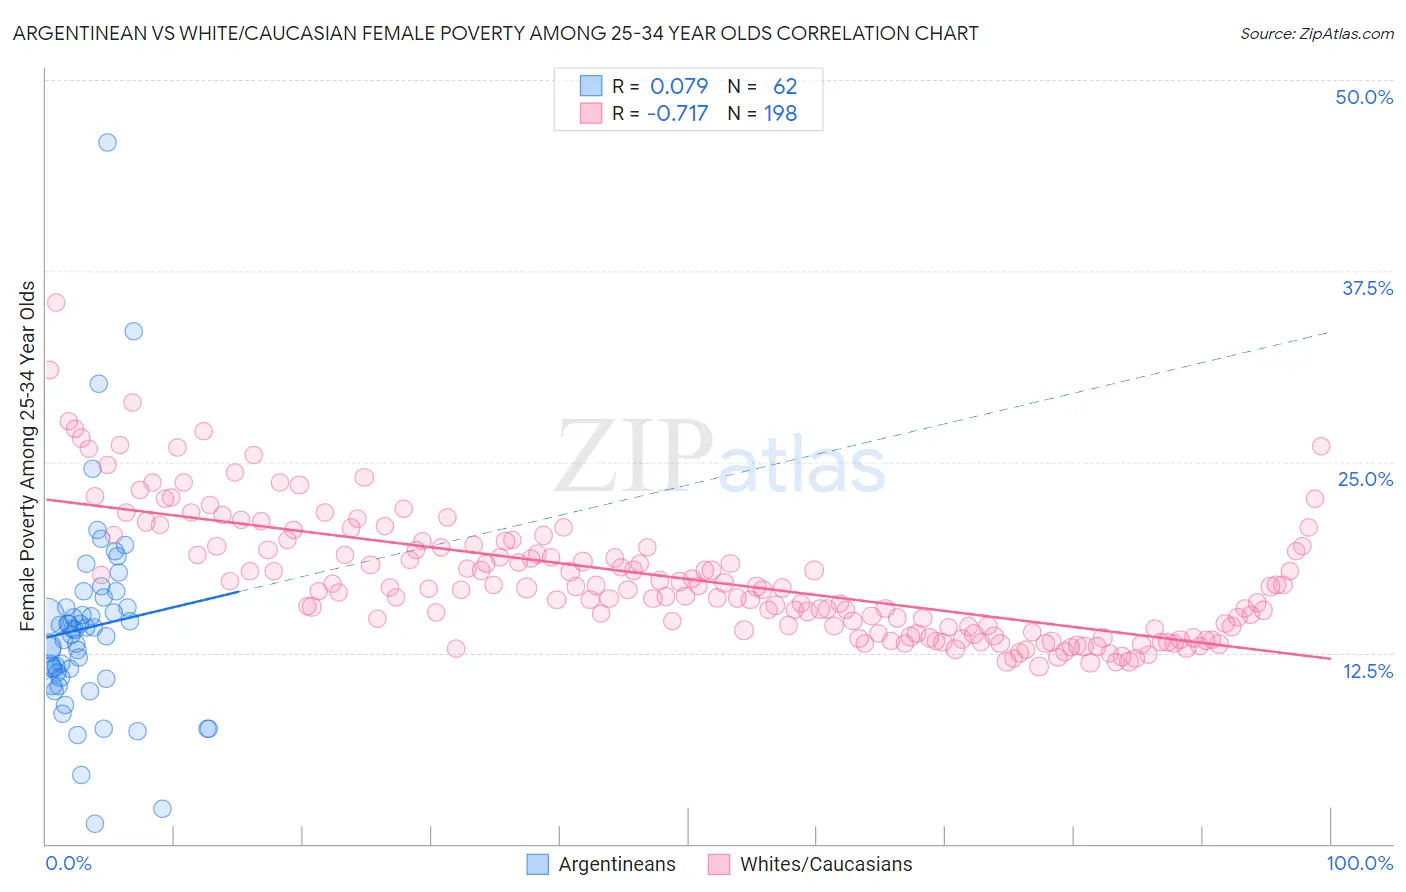 Argentinean vs White/Caucasian Female Poverty Among 25-34 Year Olds